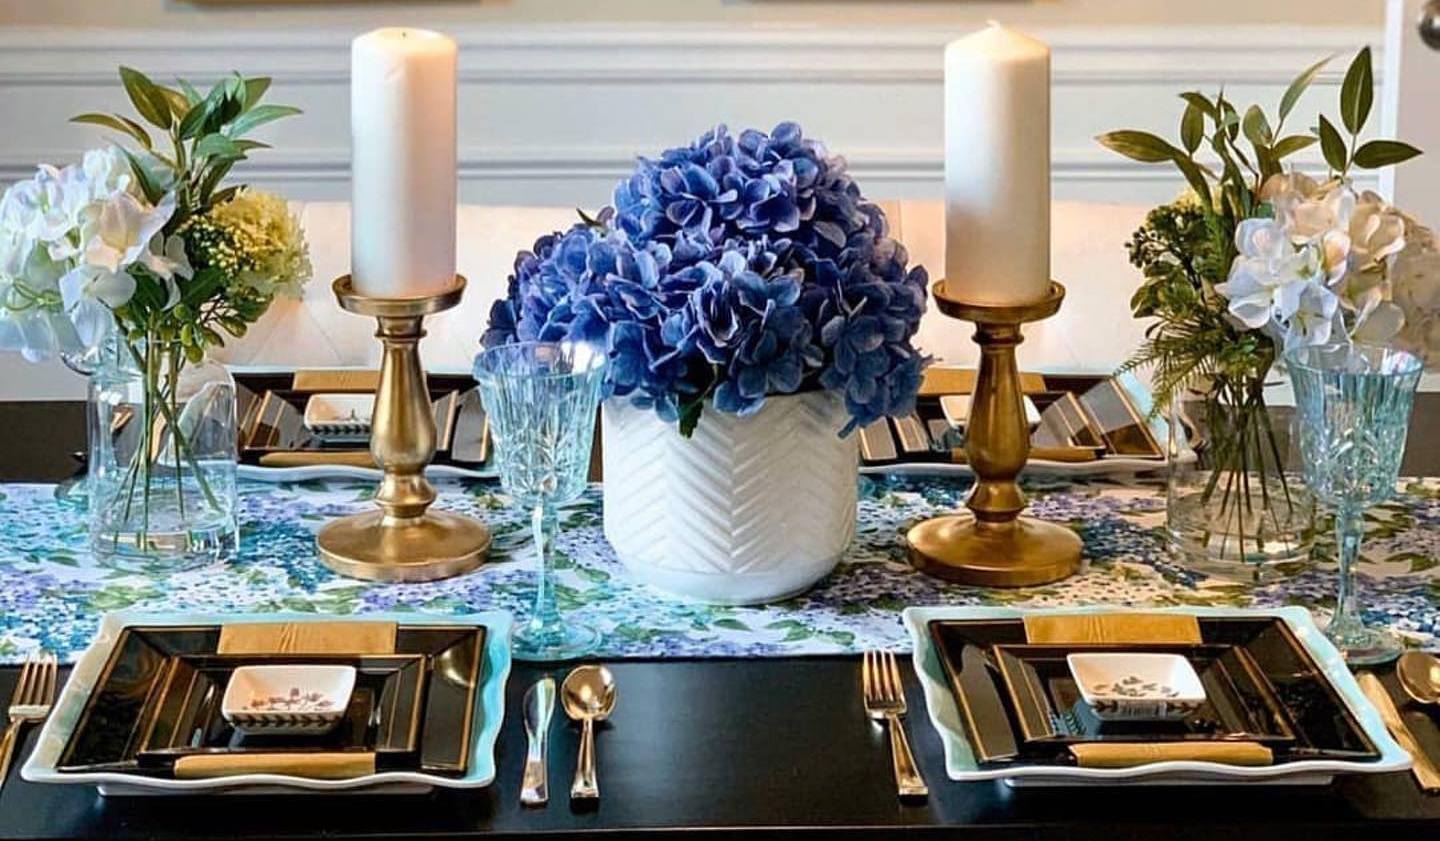 How to Set a Spring Floral Tablescape?